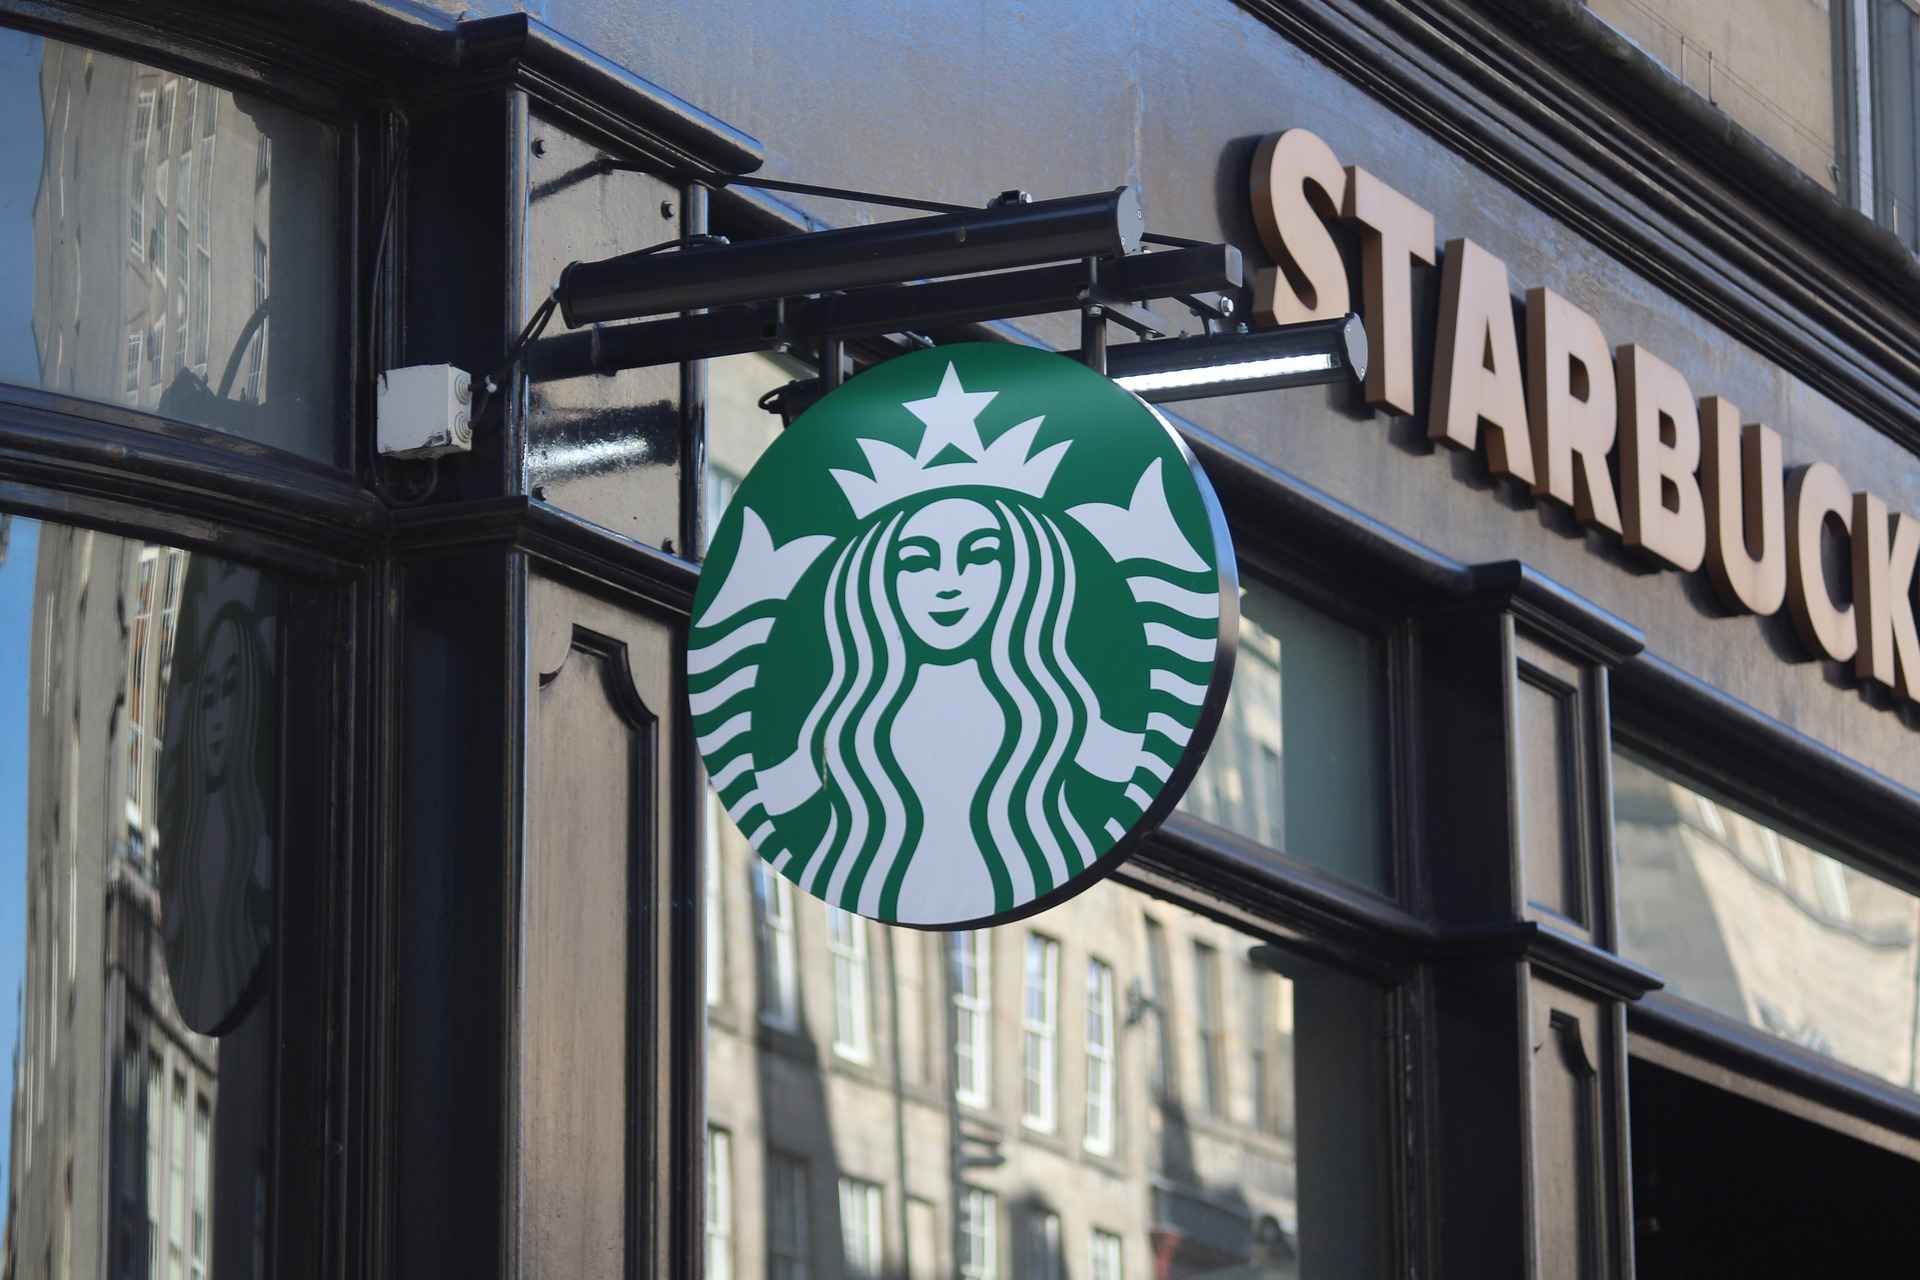 Starbucks VIS gives a peep into the visual design trend of cross-border brands